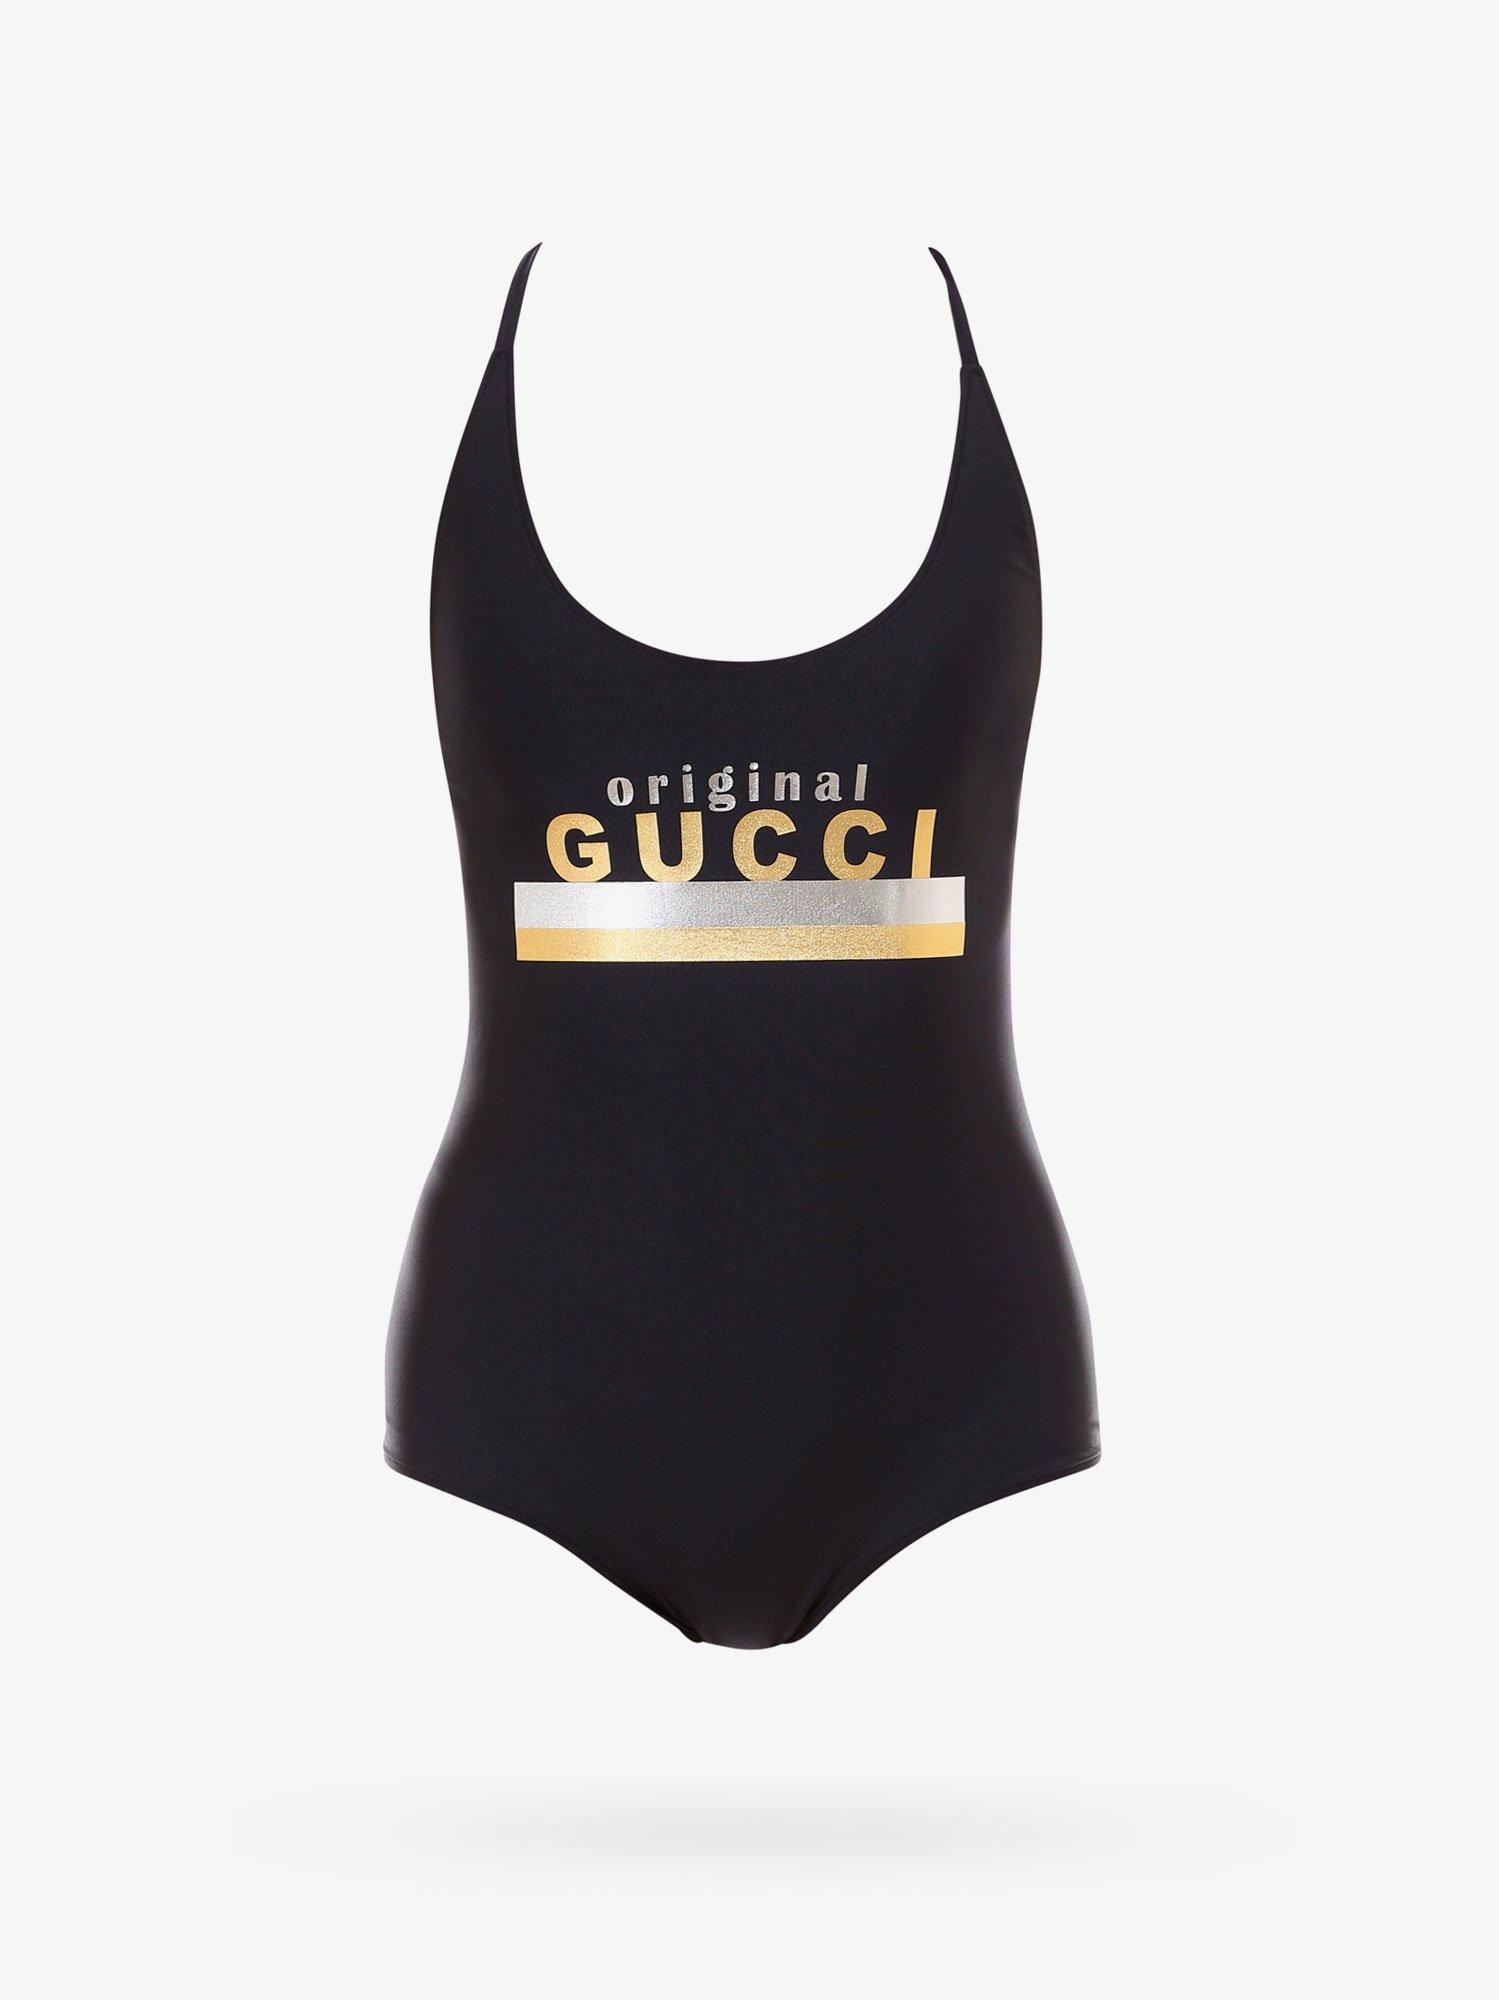 Gucci Synthetic Swim Suit in Black - Lyst